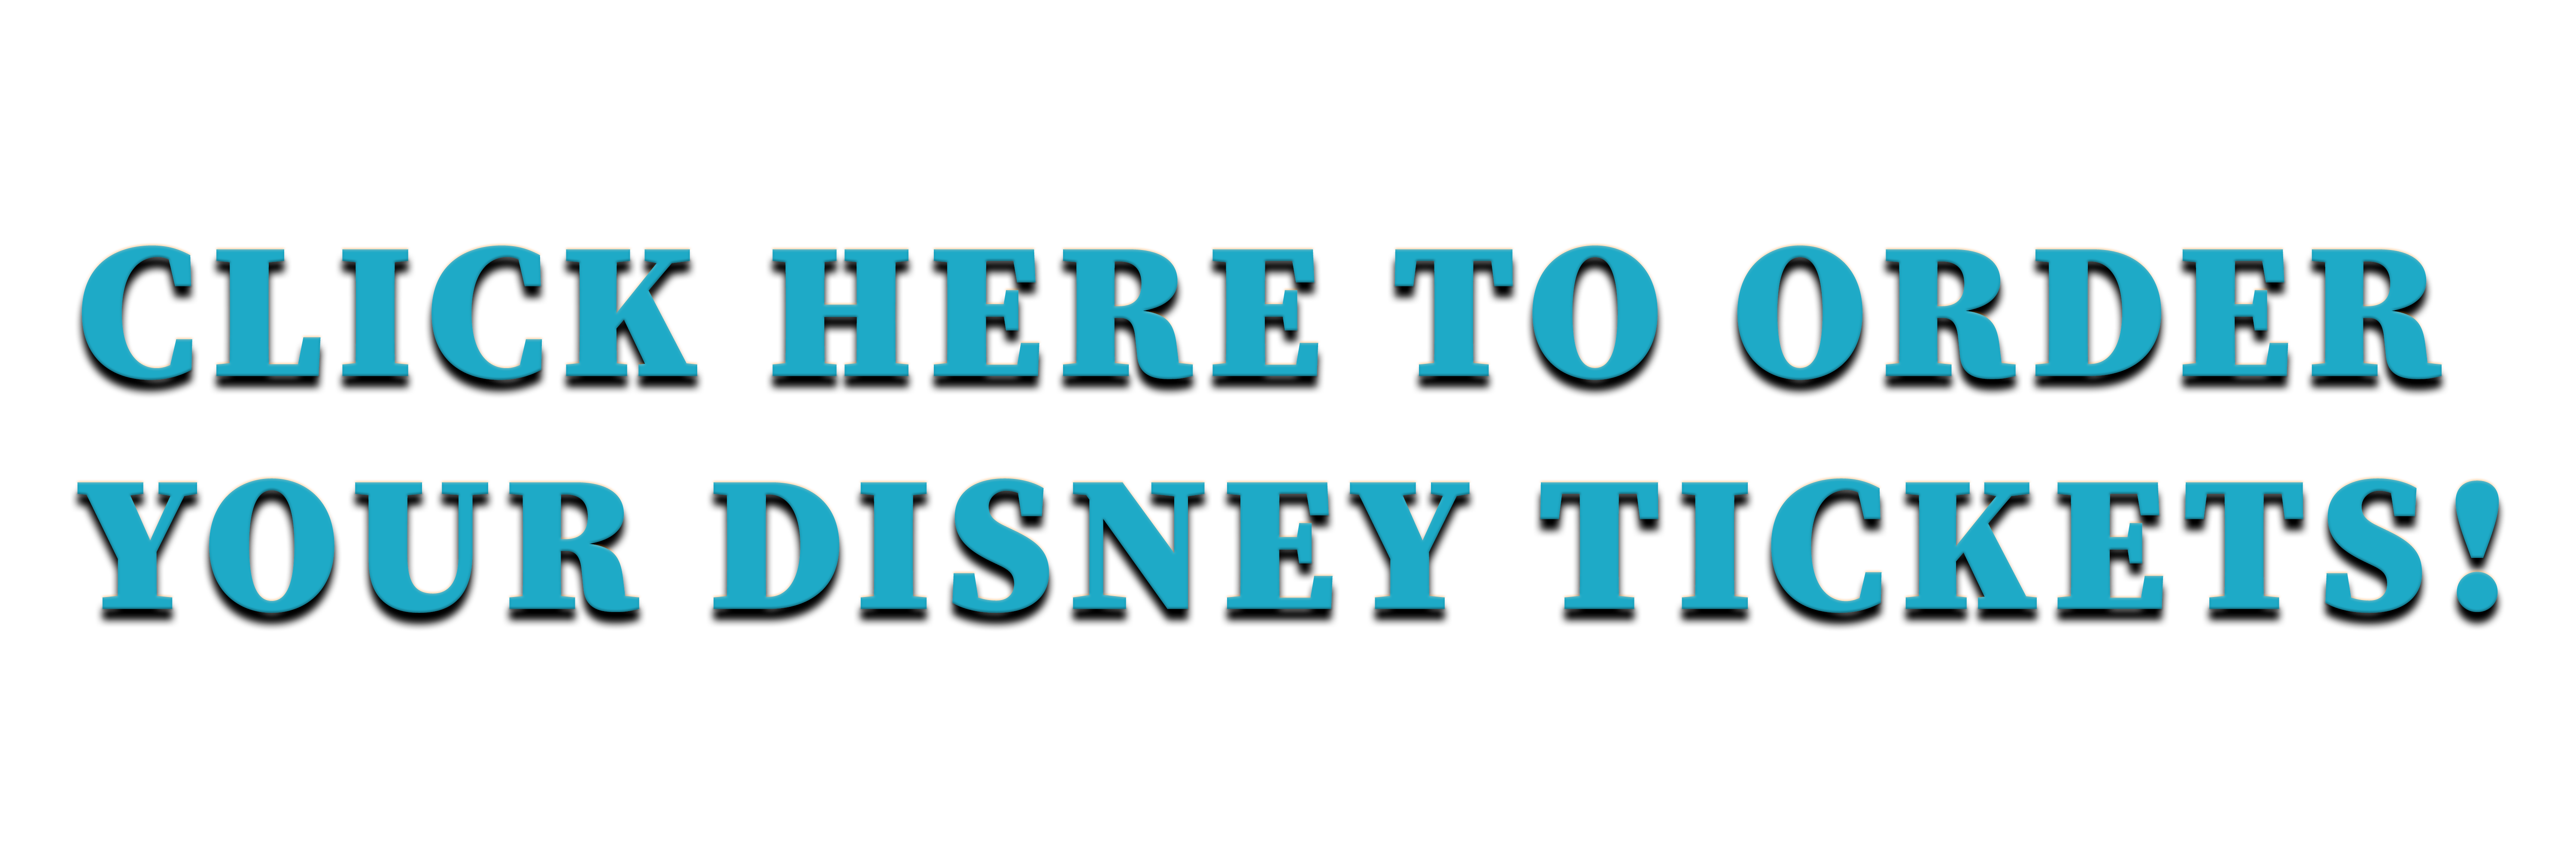 Click here to order disney discount tickets